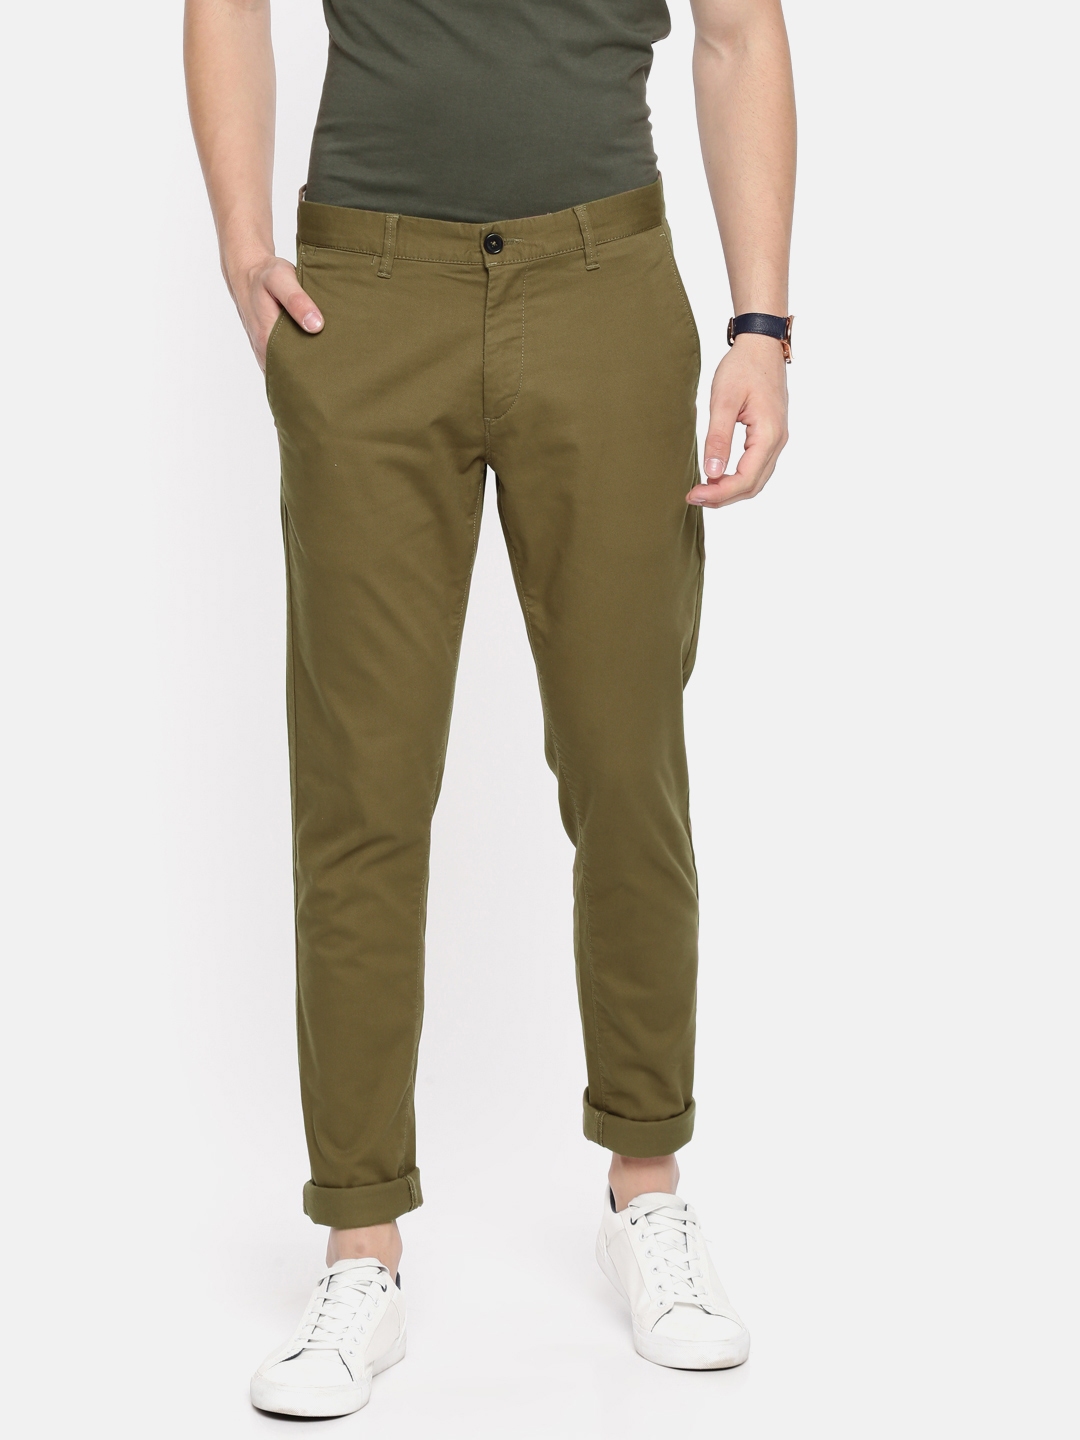 Buy US Polo Assn Men Brown Slim Fit Solid Chinos  Trousers for Men  7336710  Myntra